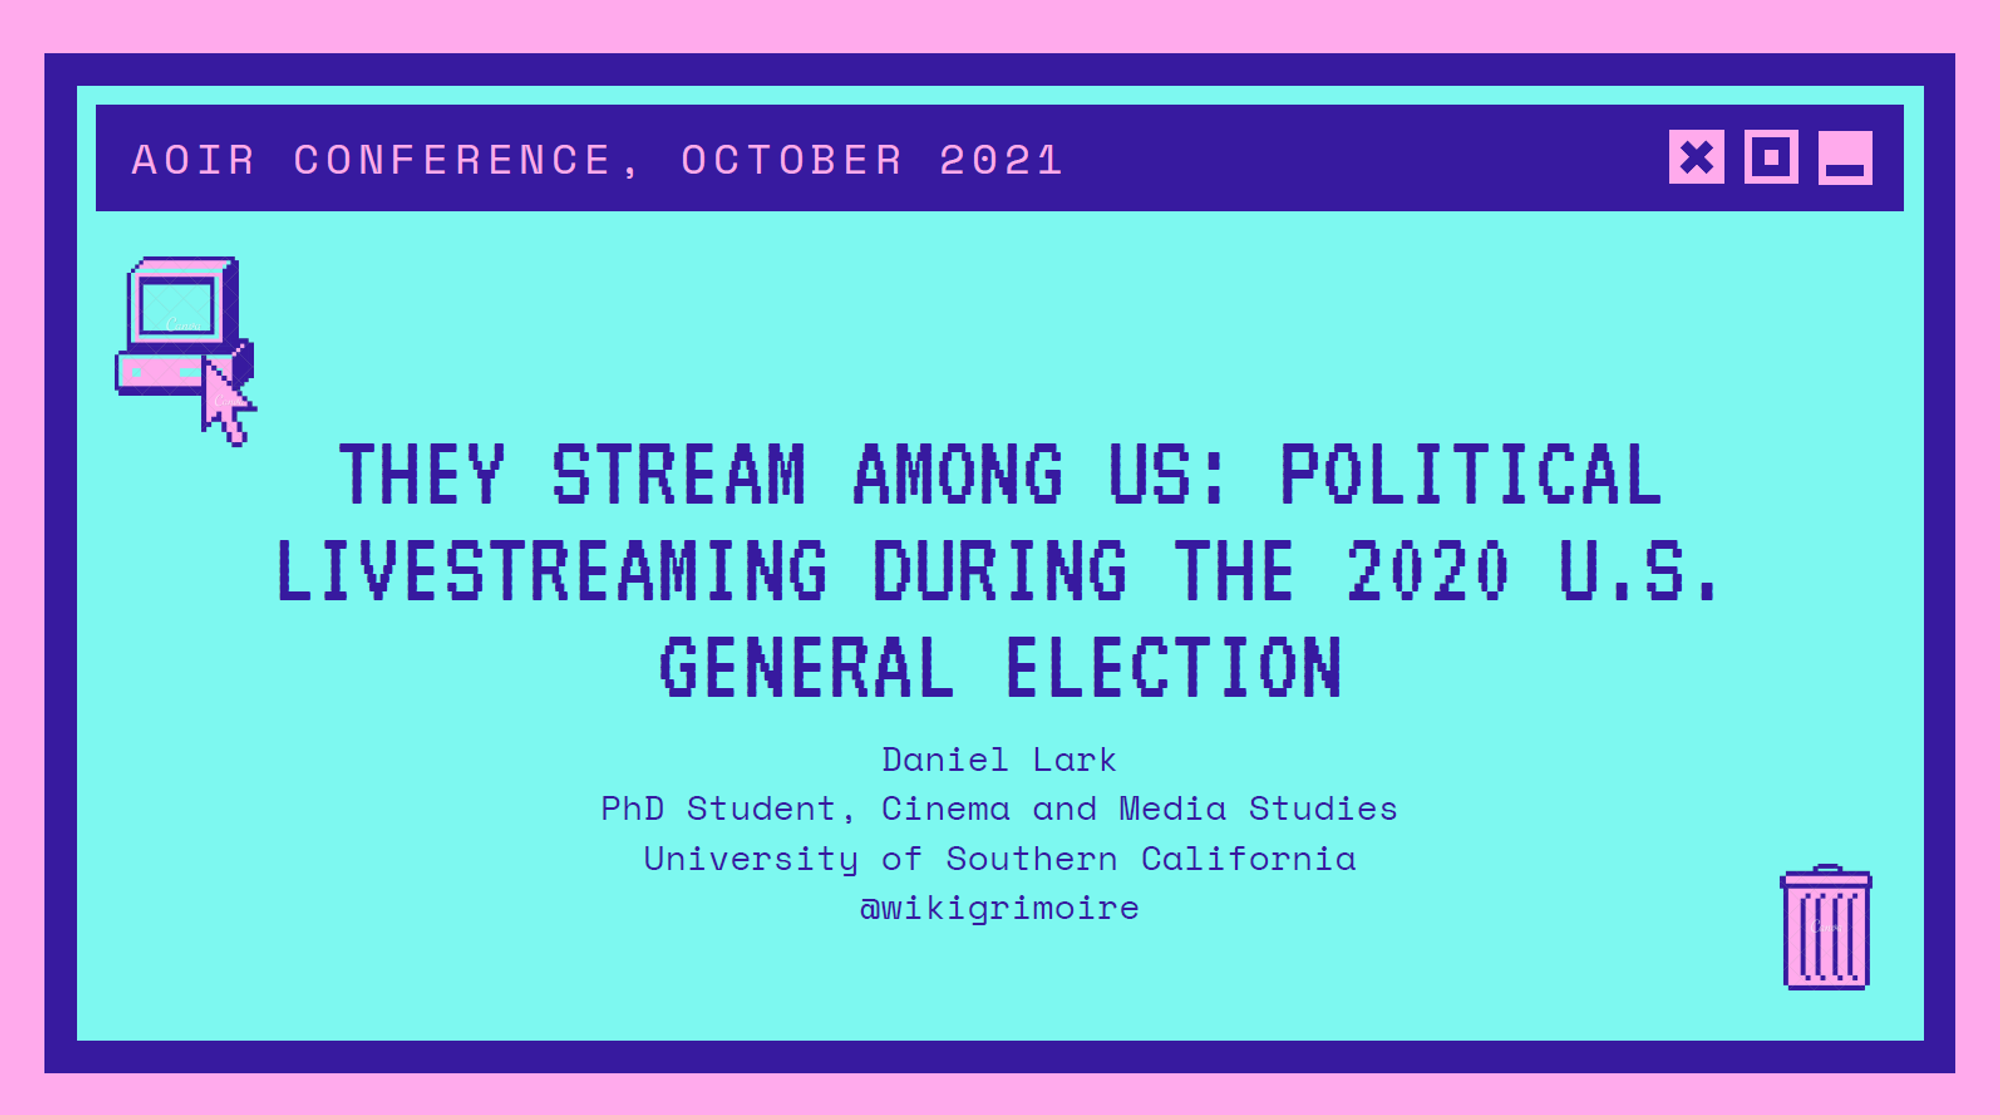 They Stream Among Us: Political Livestreaming During the 2020 U.S. General Election